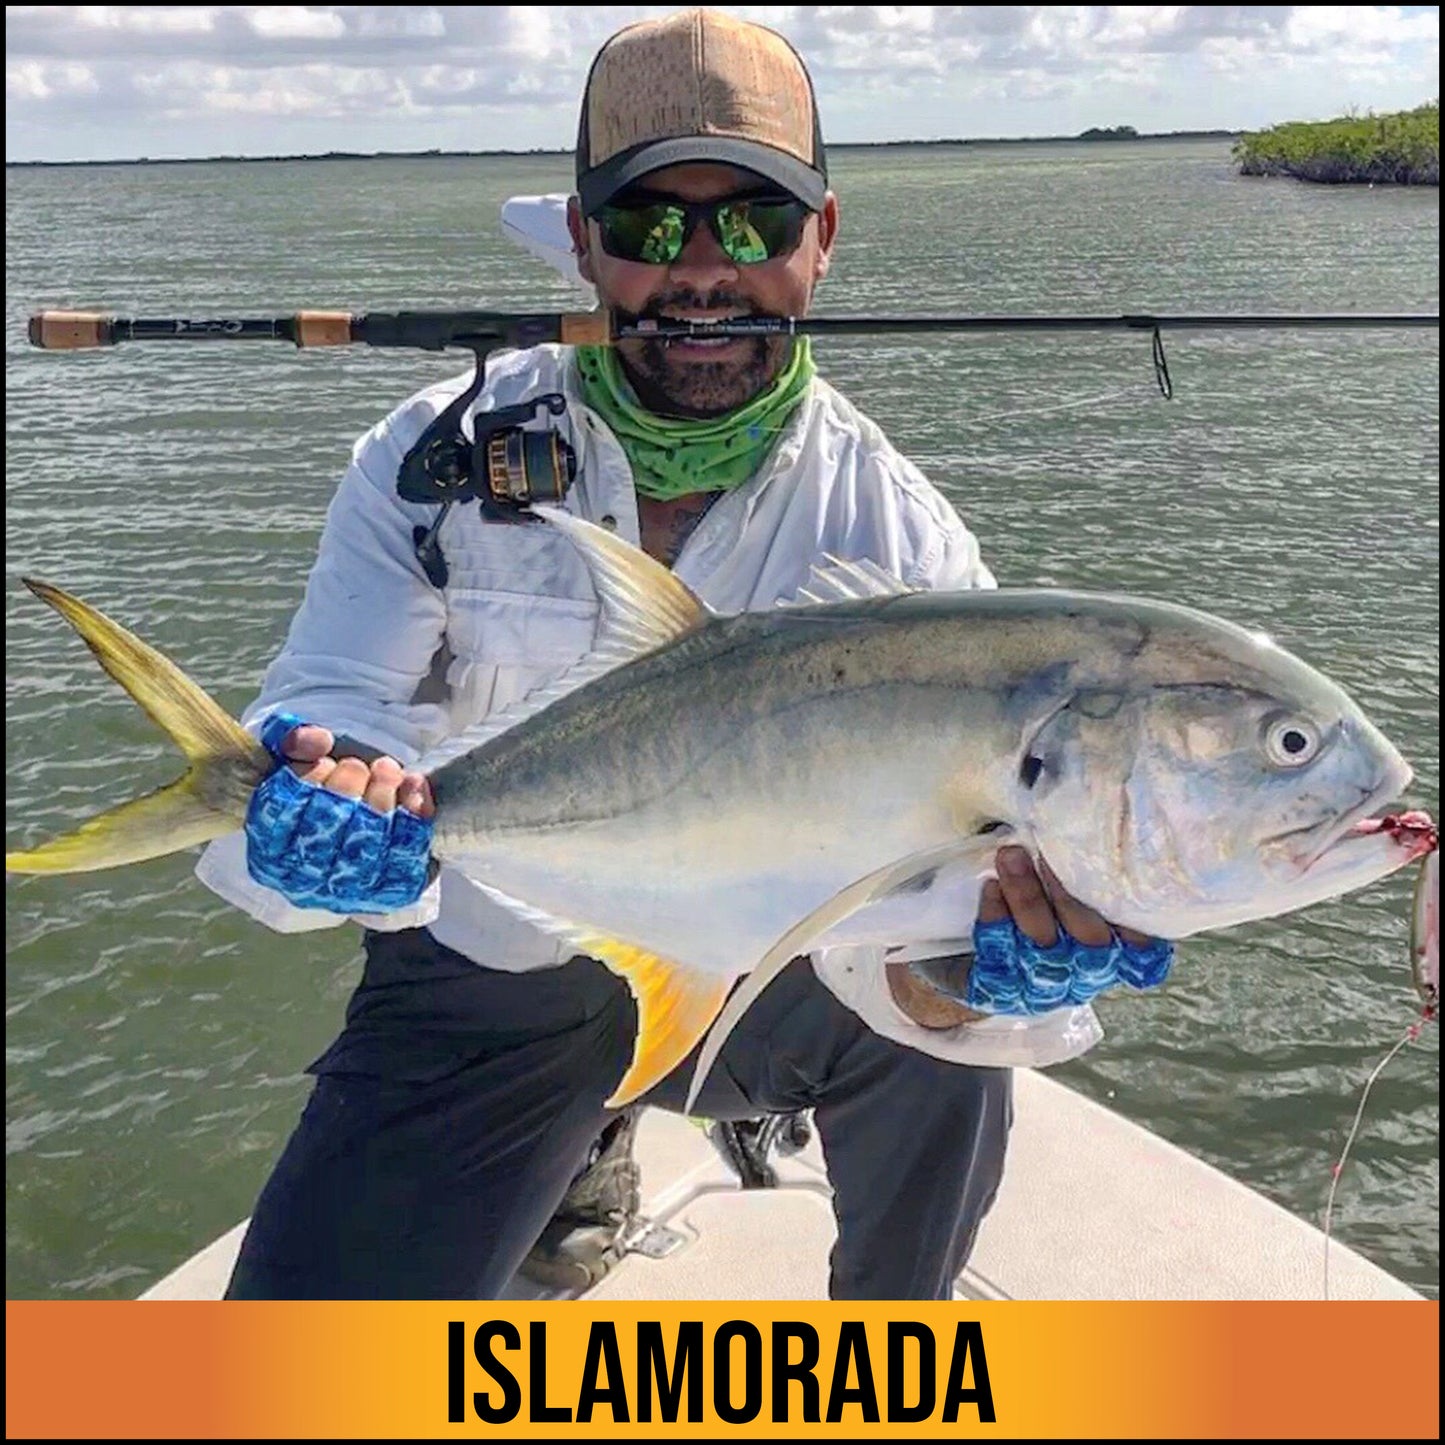 The Islamorada Sun Glove is the most popular fishing model in our sun protection line. Independently tested and verified, it is rated at the maximum protection of UPF 50+. Providing both hand and wrist protection, this glove is great for any of your outdoor adventures.